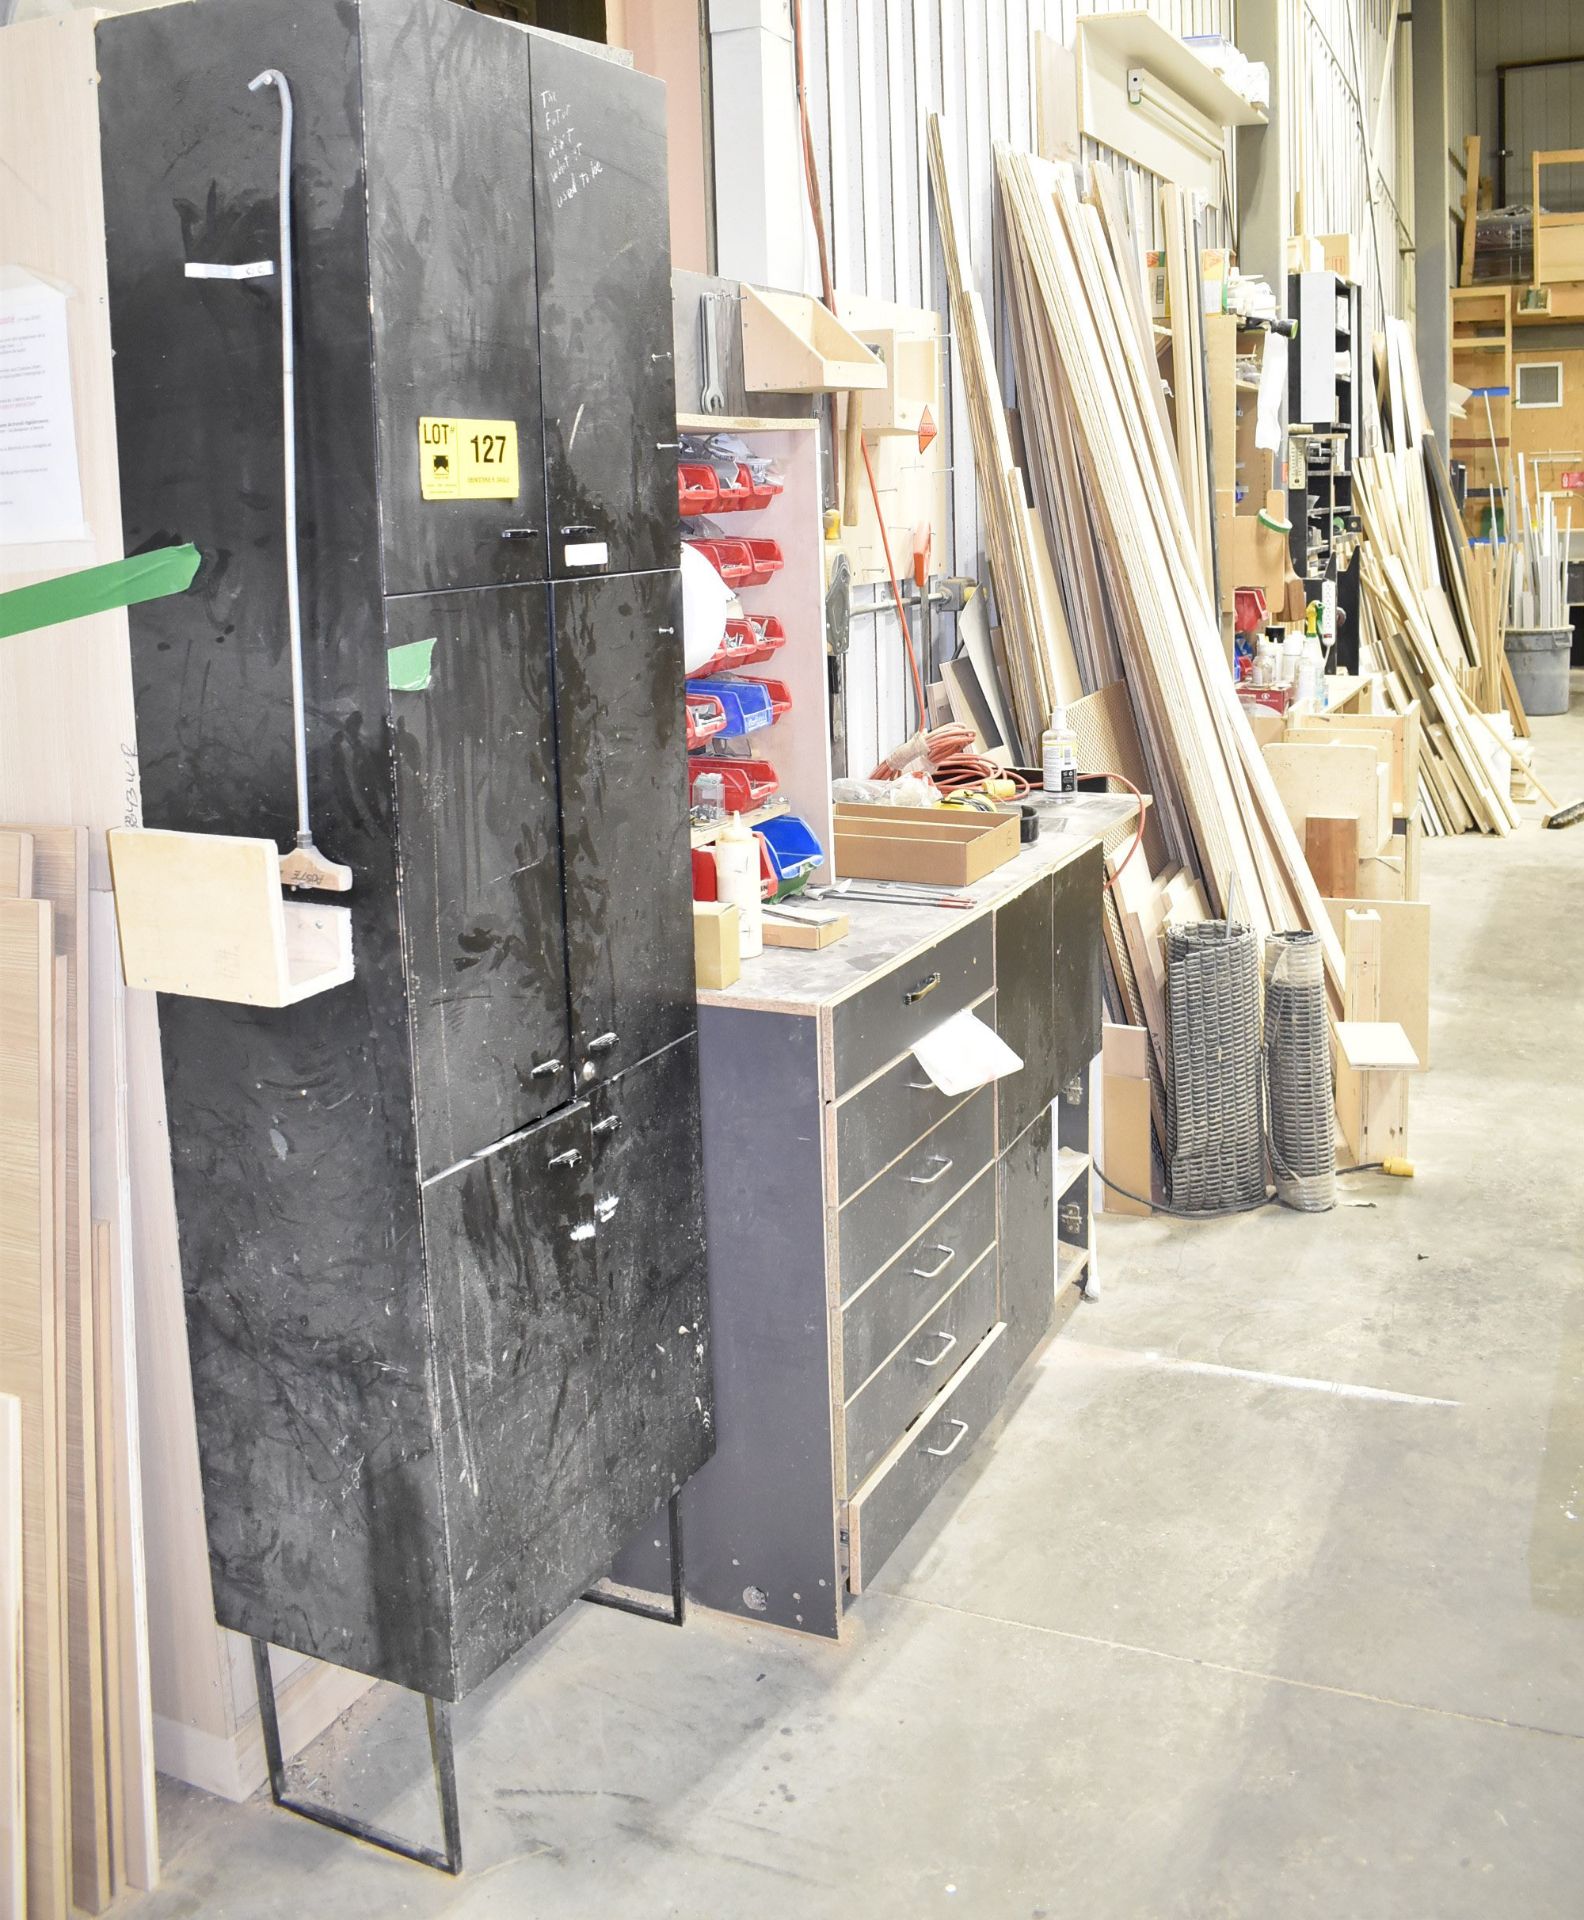 LOT/ CONTENTS ALONG WALL CONSISTING OF WORKBENCHES, TOOLS, HARDWARE, WOOD TRIM AND PANELS [RIGGING